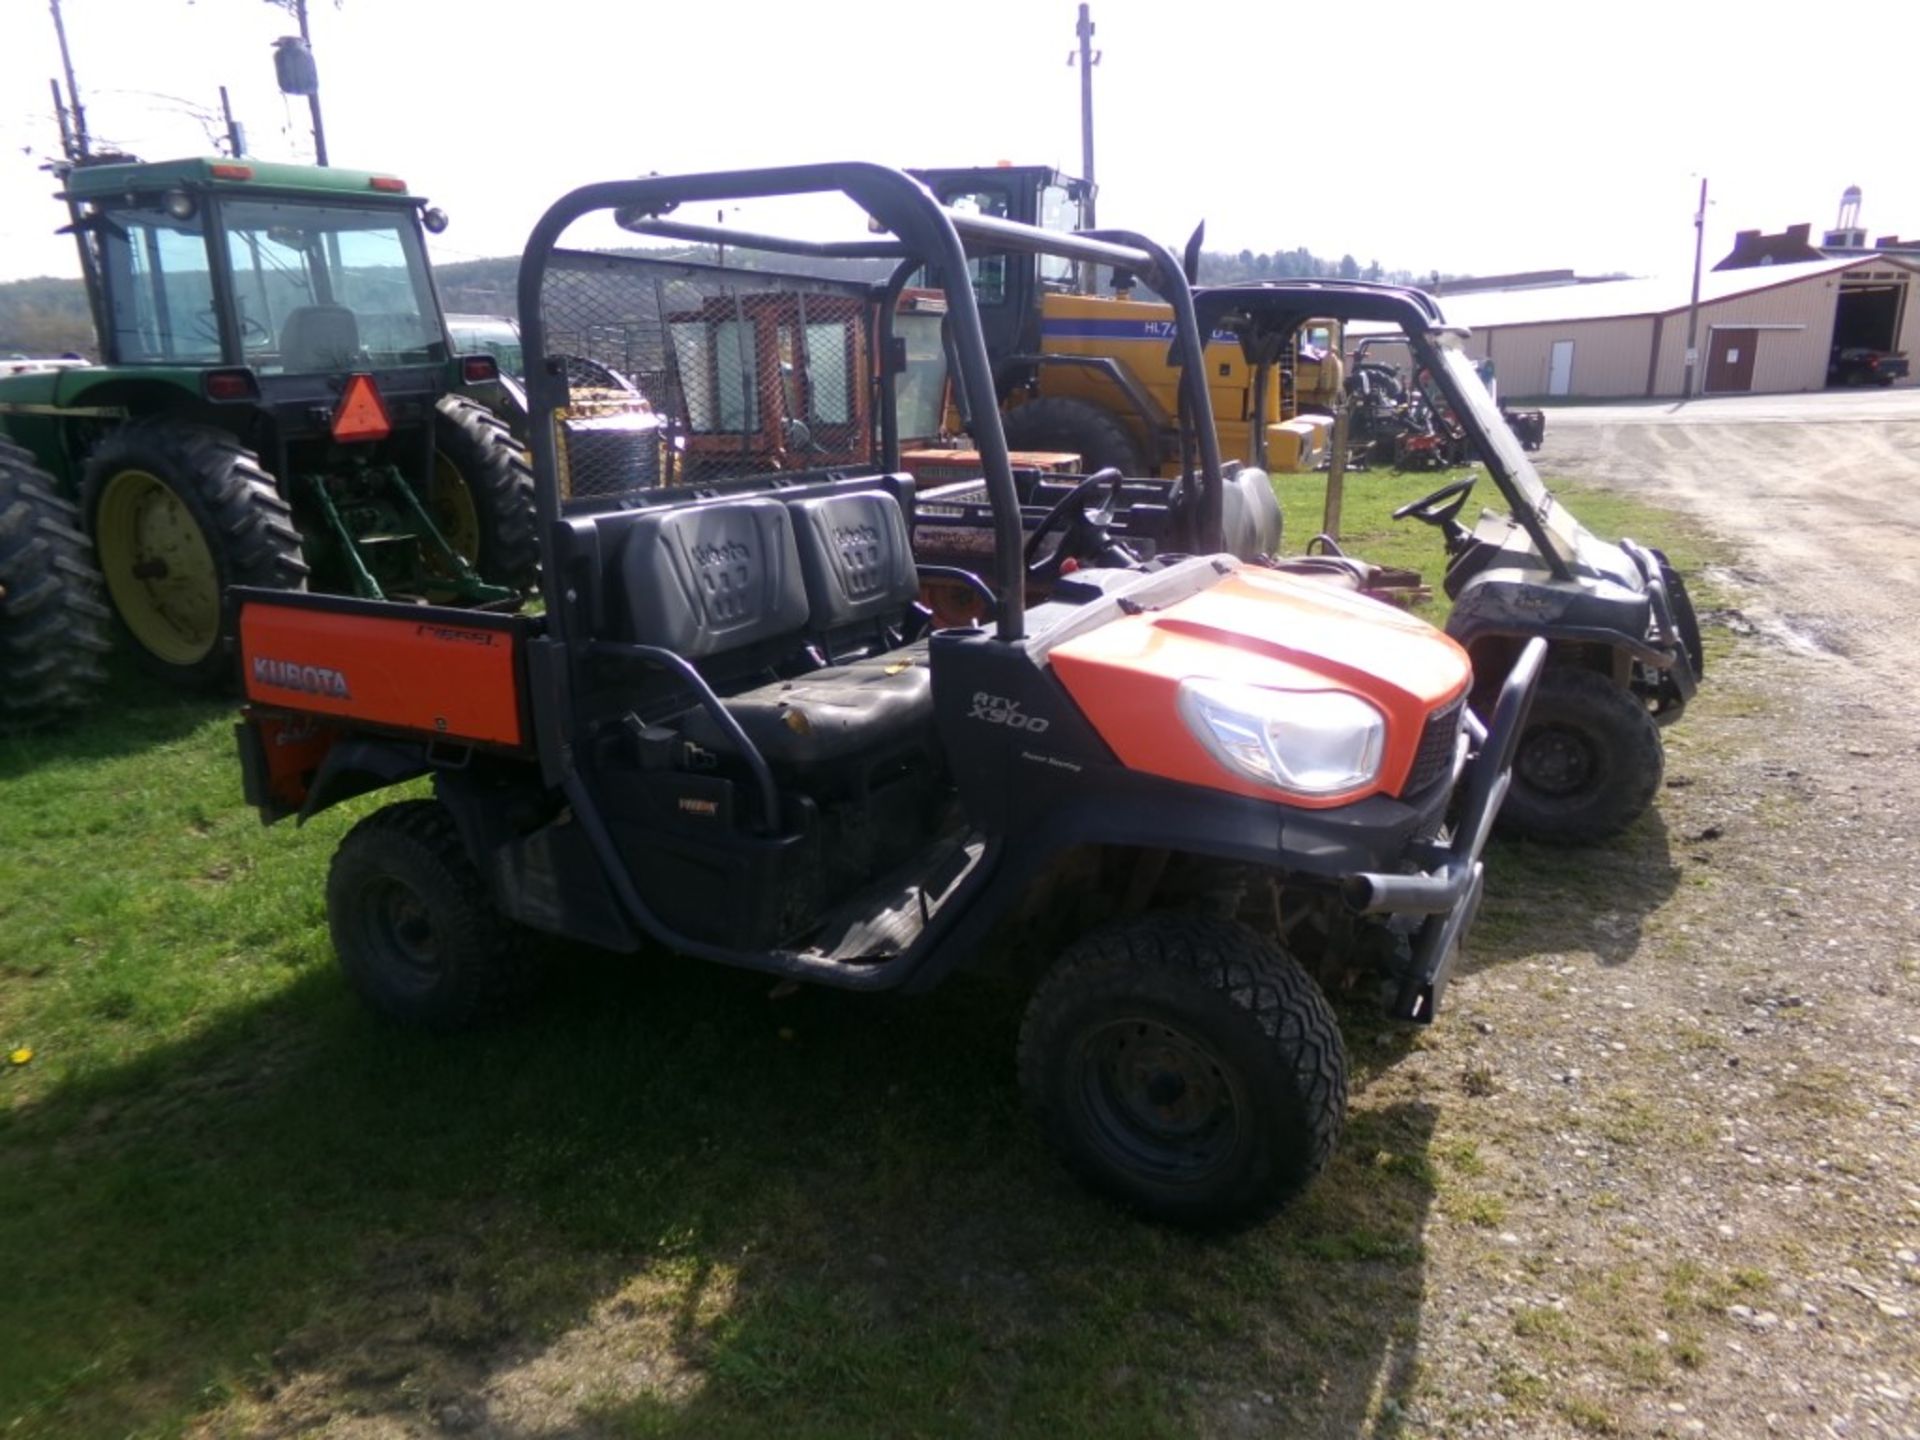 Kubota RTV X900 Diesel Side by Side, Runs, Dump Works, WON'T SHIFT OUT OF NEUTRAL, 10,575 Hrs., - Image 2 of 3